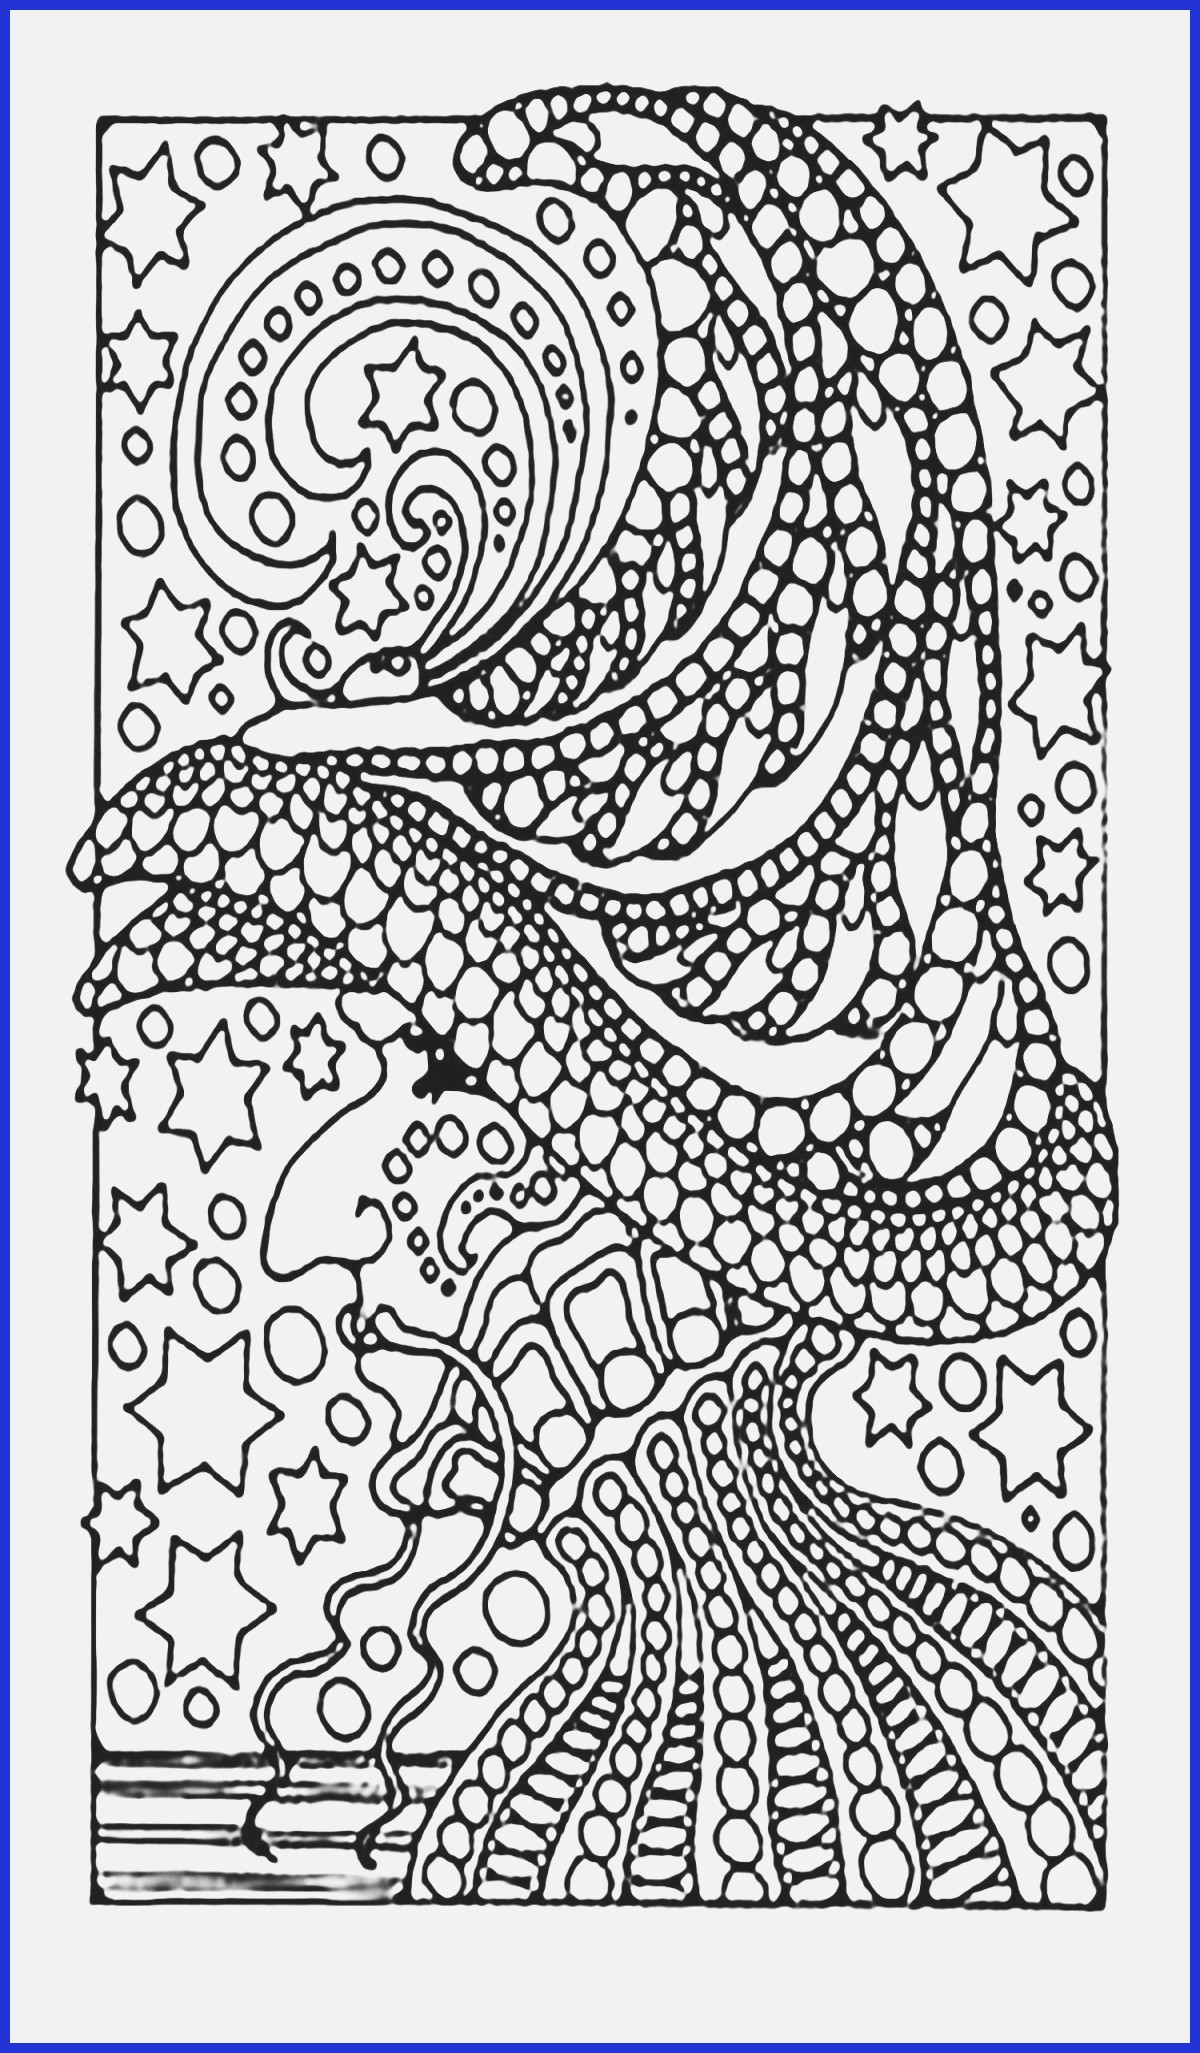 Personalized Coloring Pages Free Personalized Coloring Pages Beautiful 40 Inspirational Free